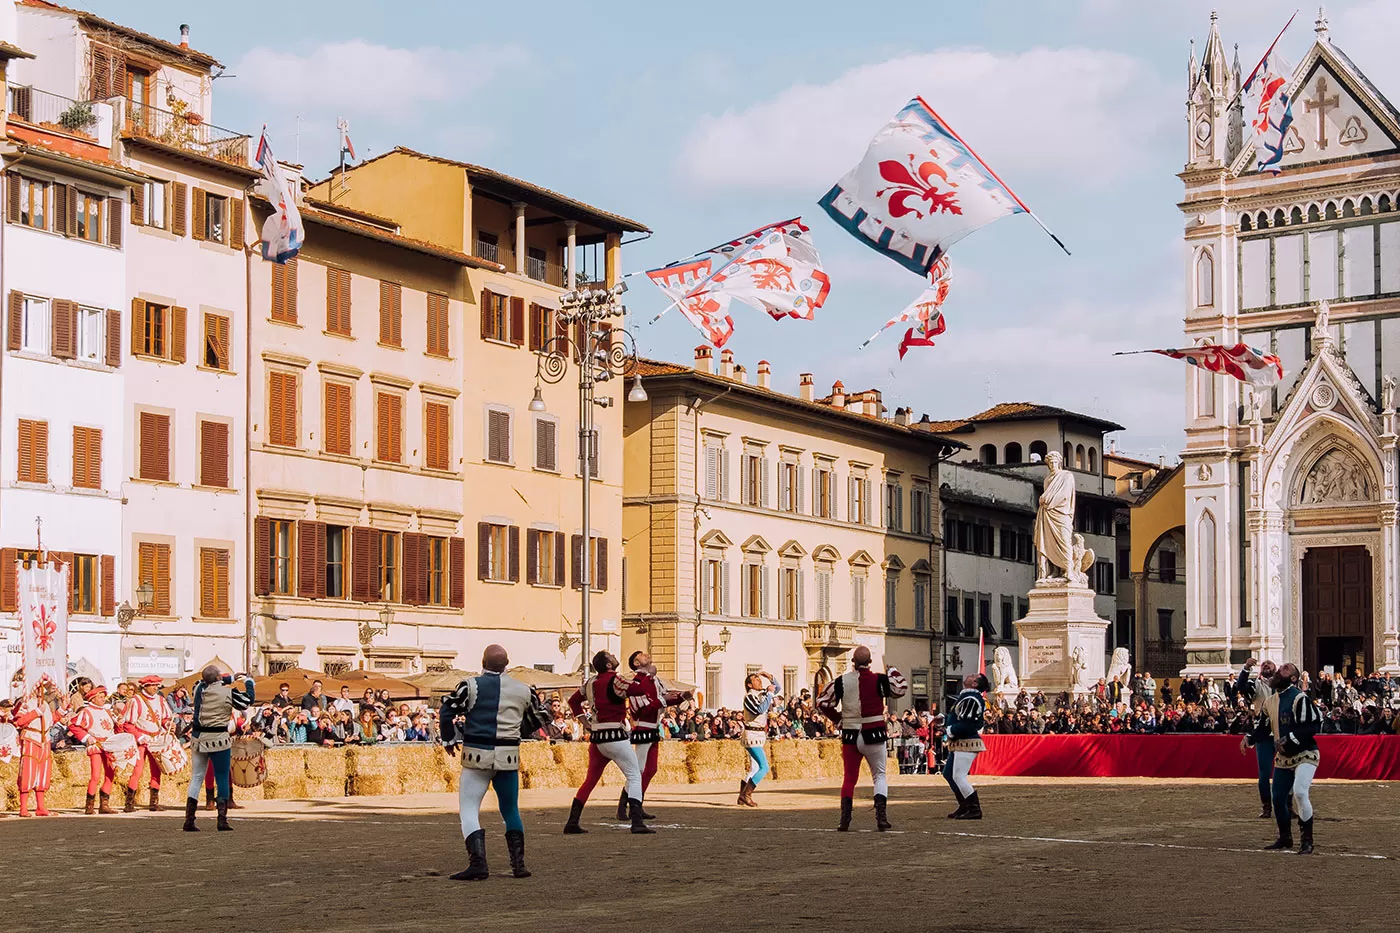 Where to Stay in Florence - Santa Croce - Calcio Storico - Flag throwing